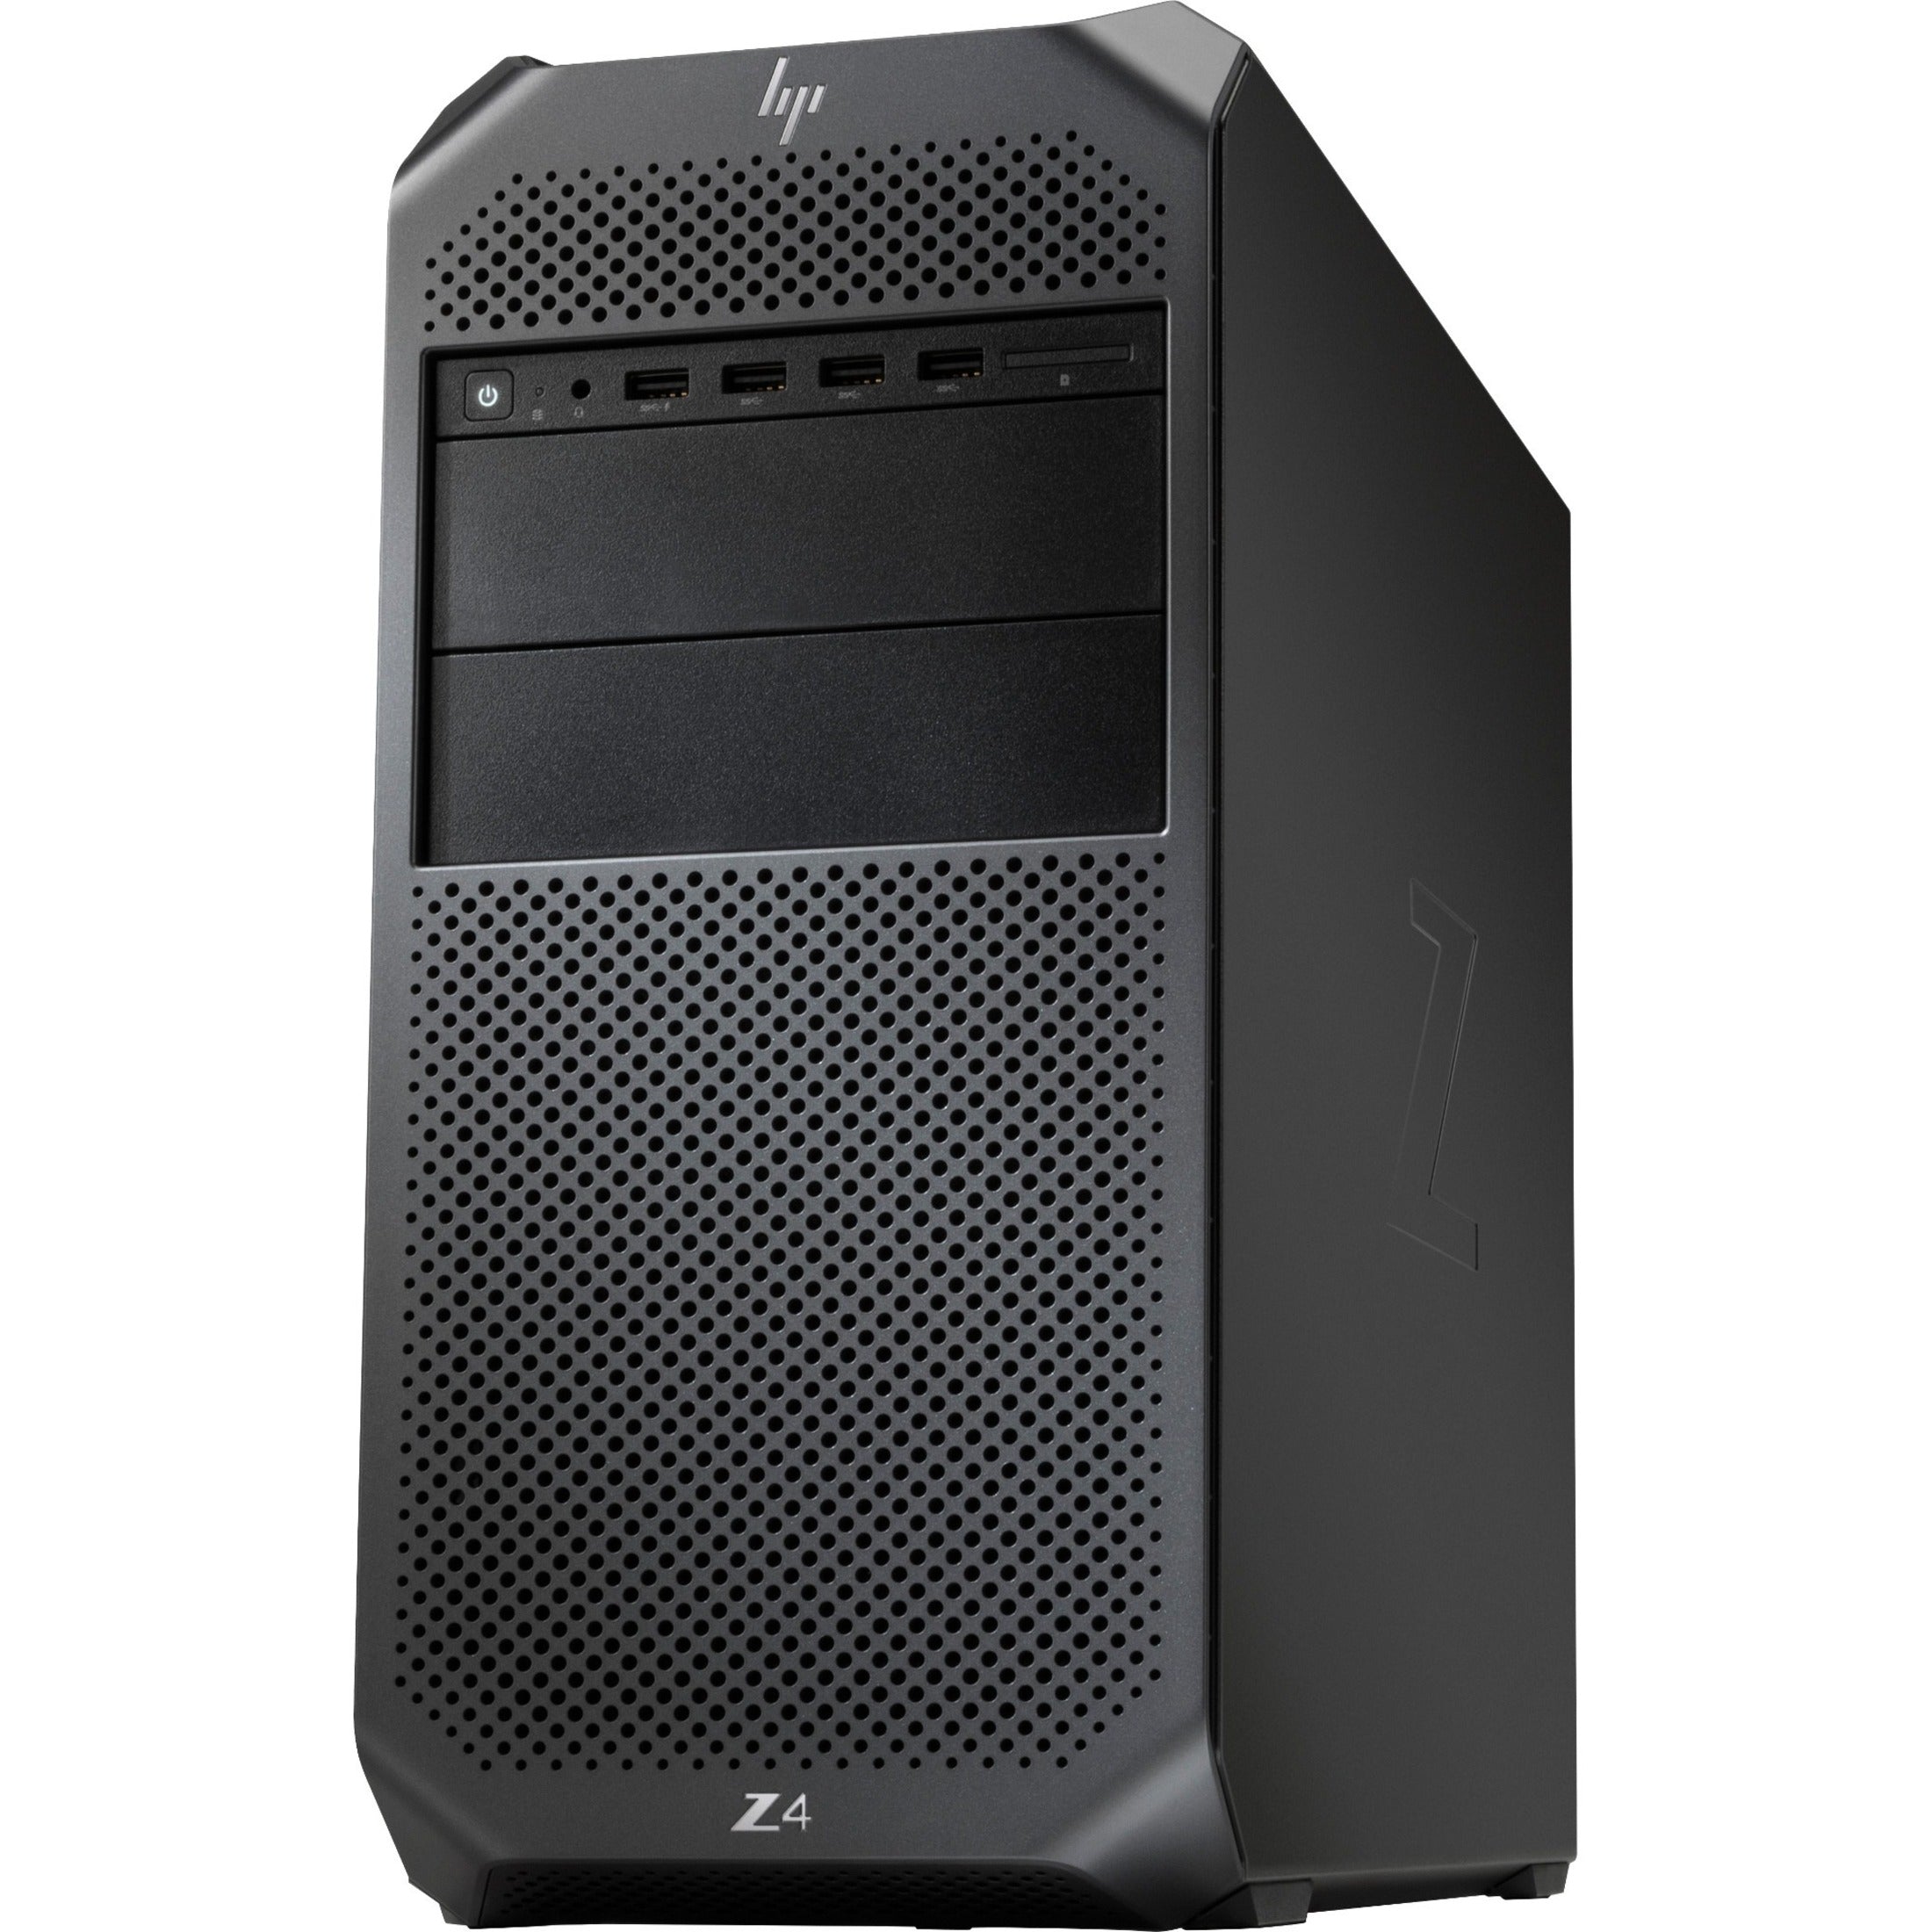 HP Z4 G4 Workstation - Intel Core i9 Deca-core - 16GB RAM - 512GB SSD - Tower [Discontinued]